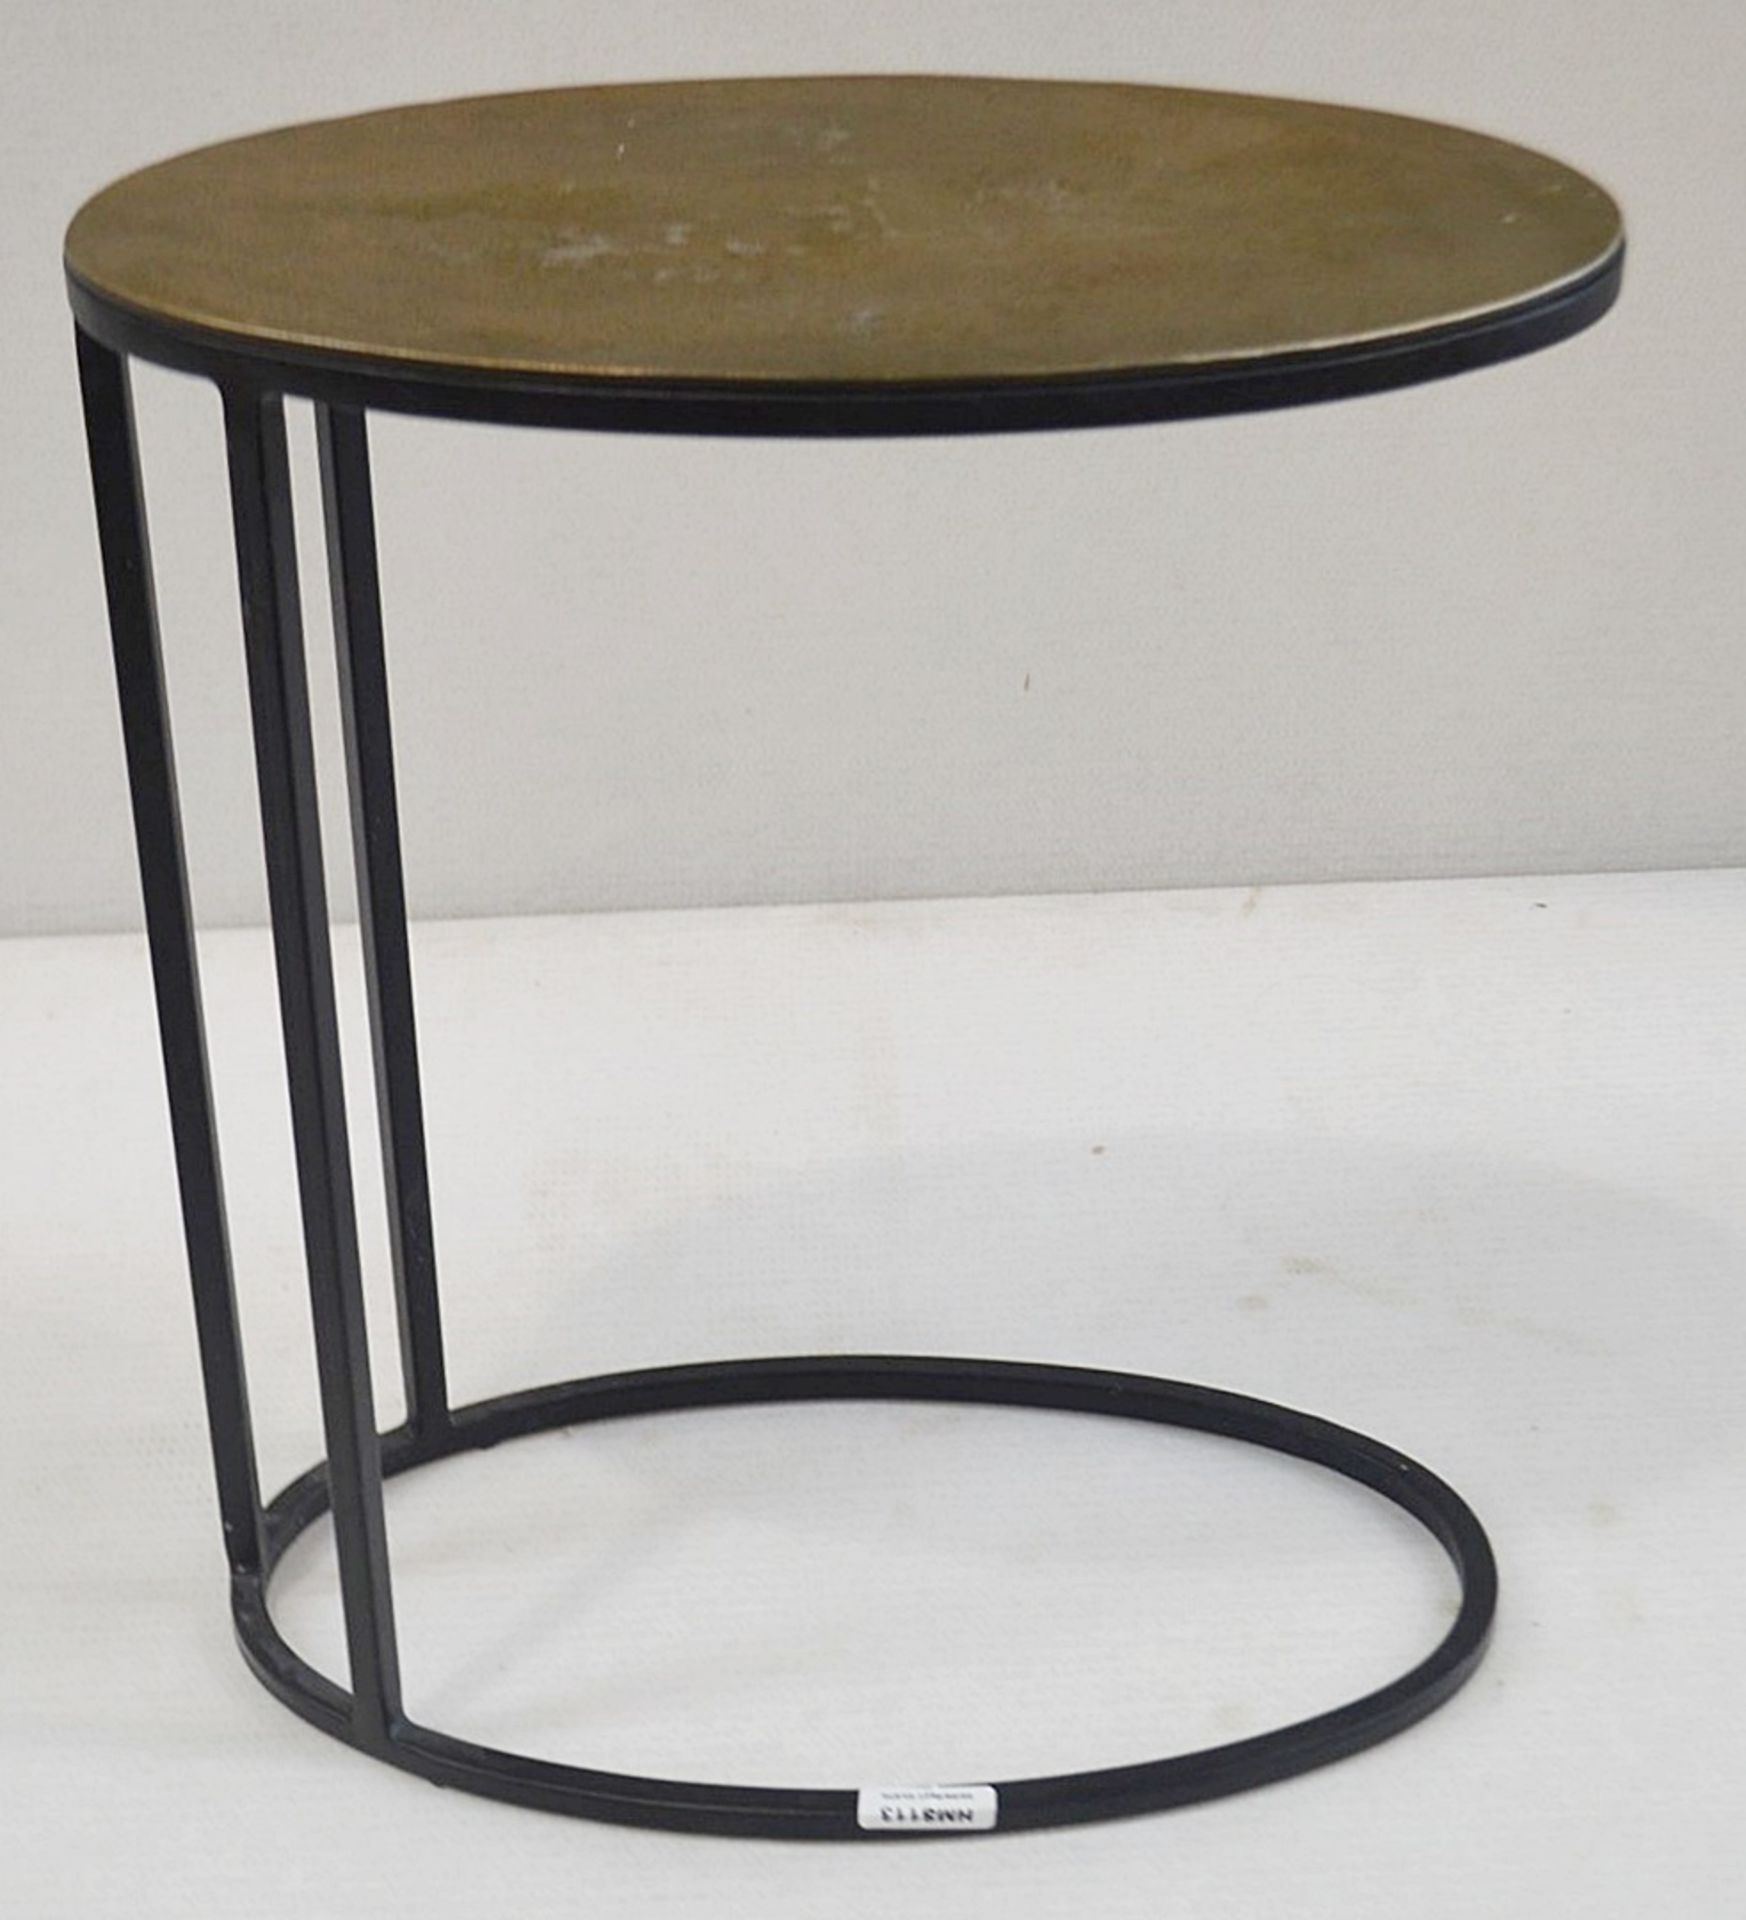 A Pair Of Elegant Oval Shaped Side Tables With Slim Metal Bases And Textured Brass Finish - - Image 2 of 3